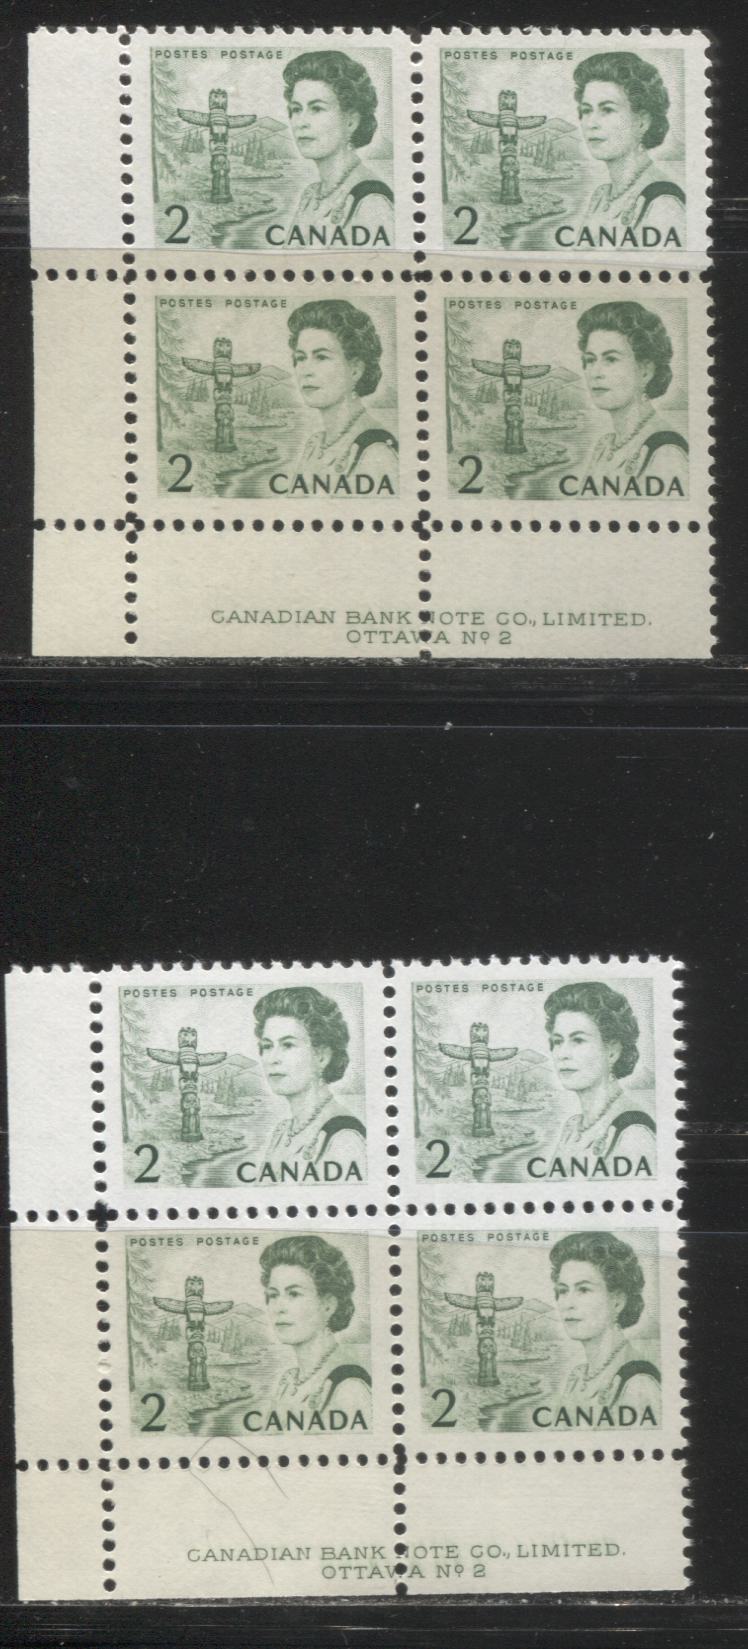 Lot #169 Canada #455ii 2c Bright Green, Pacific Coast Totem Pole, 1967-1973 Centennial Issue, Two VFNH LL Plate 2 Blocks on Two Different LF-fl Papers, PVA Gum, Different From Lot 170